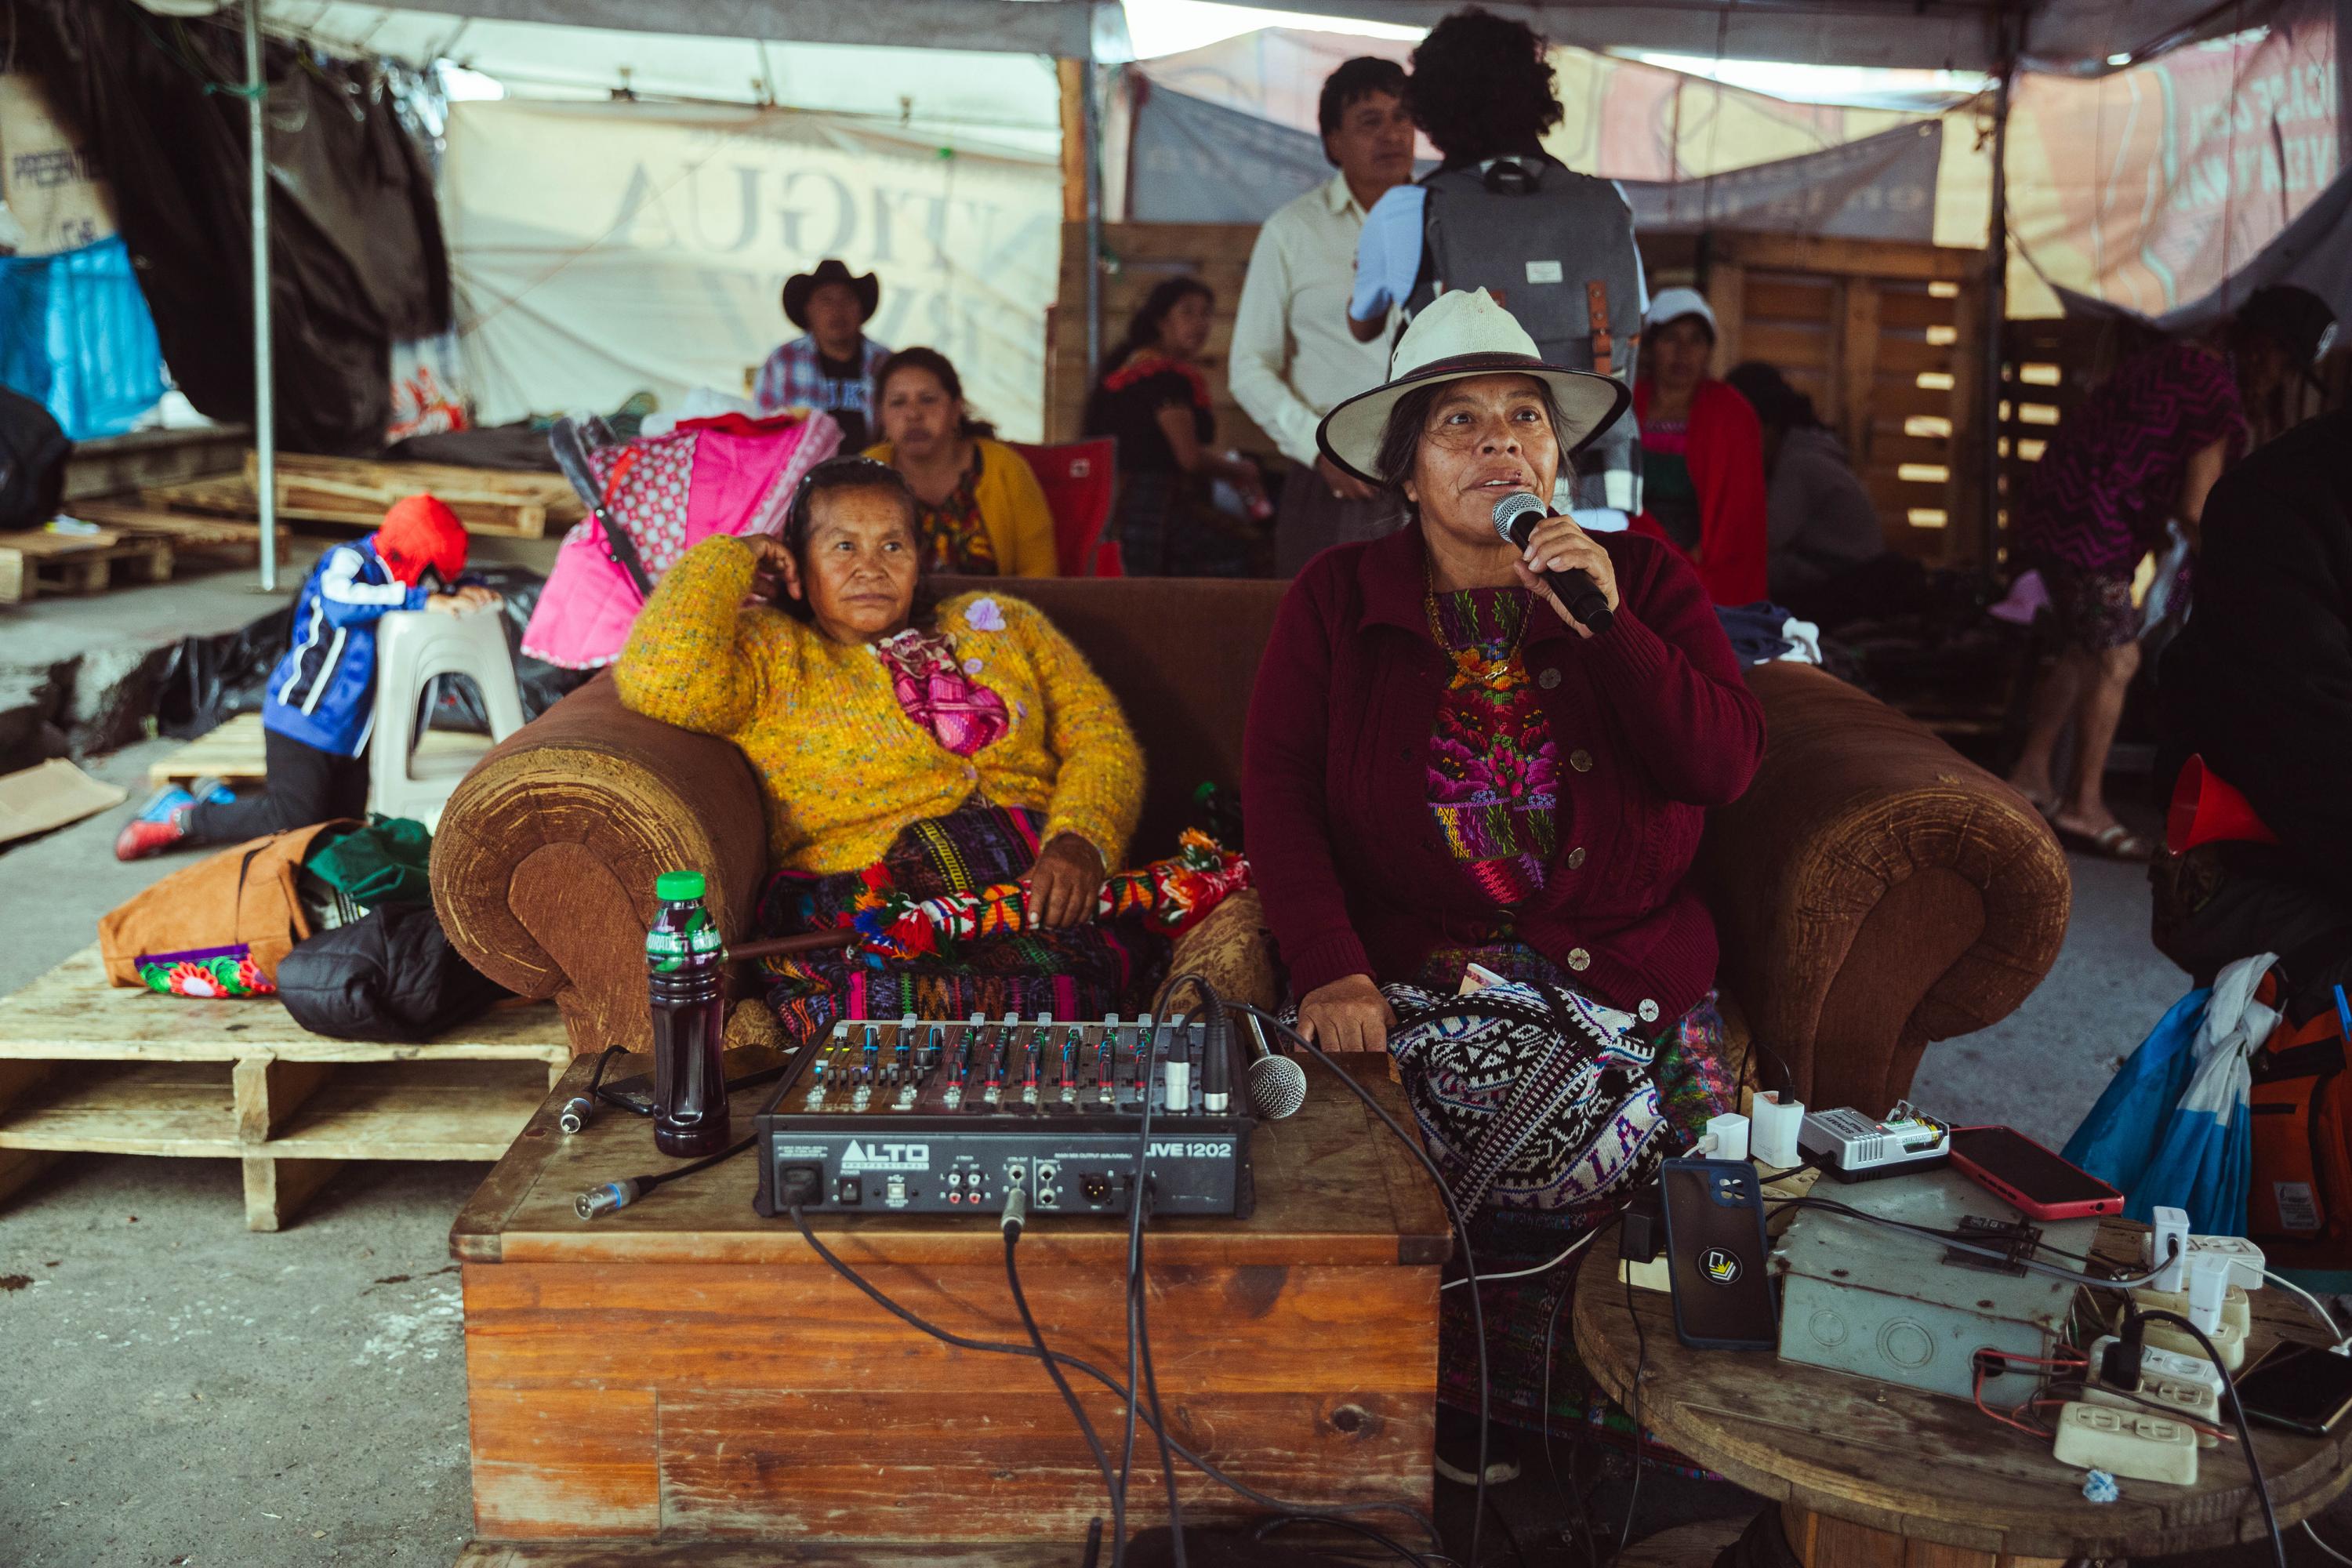 Luz Emilia Ulario (left) and Imelda Estacui, leaders from the Indigenous Mayor’s Office of Santa Lucía Utatlán, at the camp in front of the Public Prosecutor’s Office, where demonstrators stayed from early October until Bernardo Arévalo’s inauguration. Photo Carlos Barrera